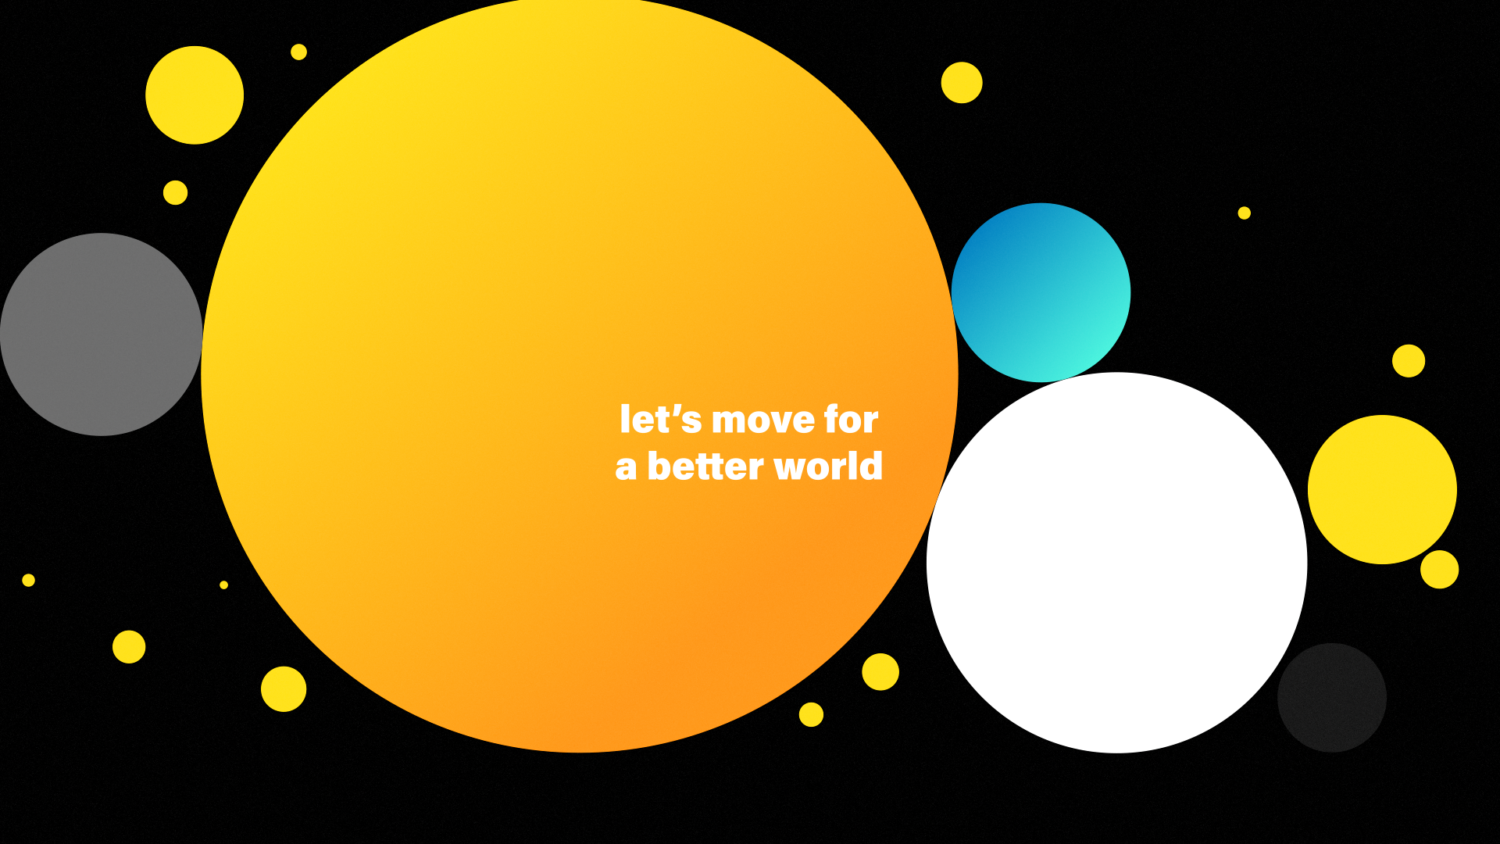 Let's move for a better world